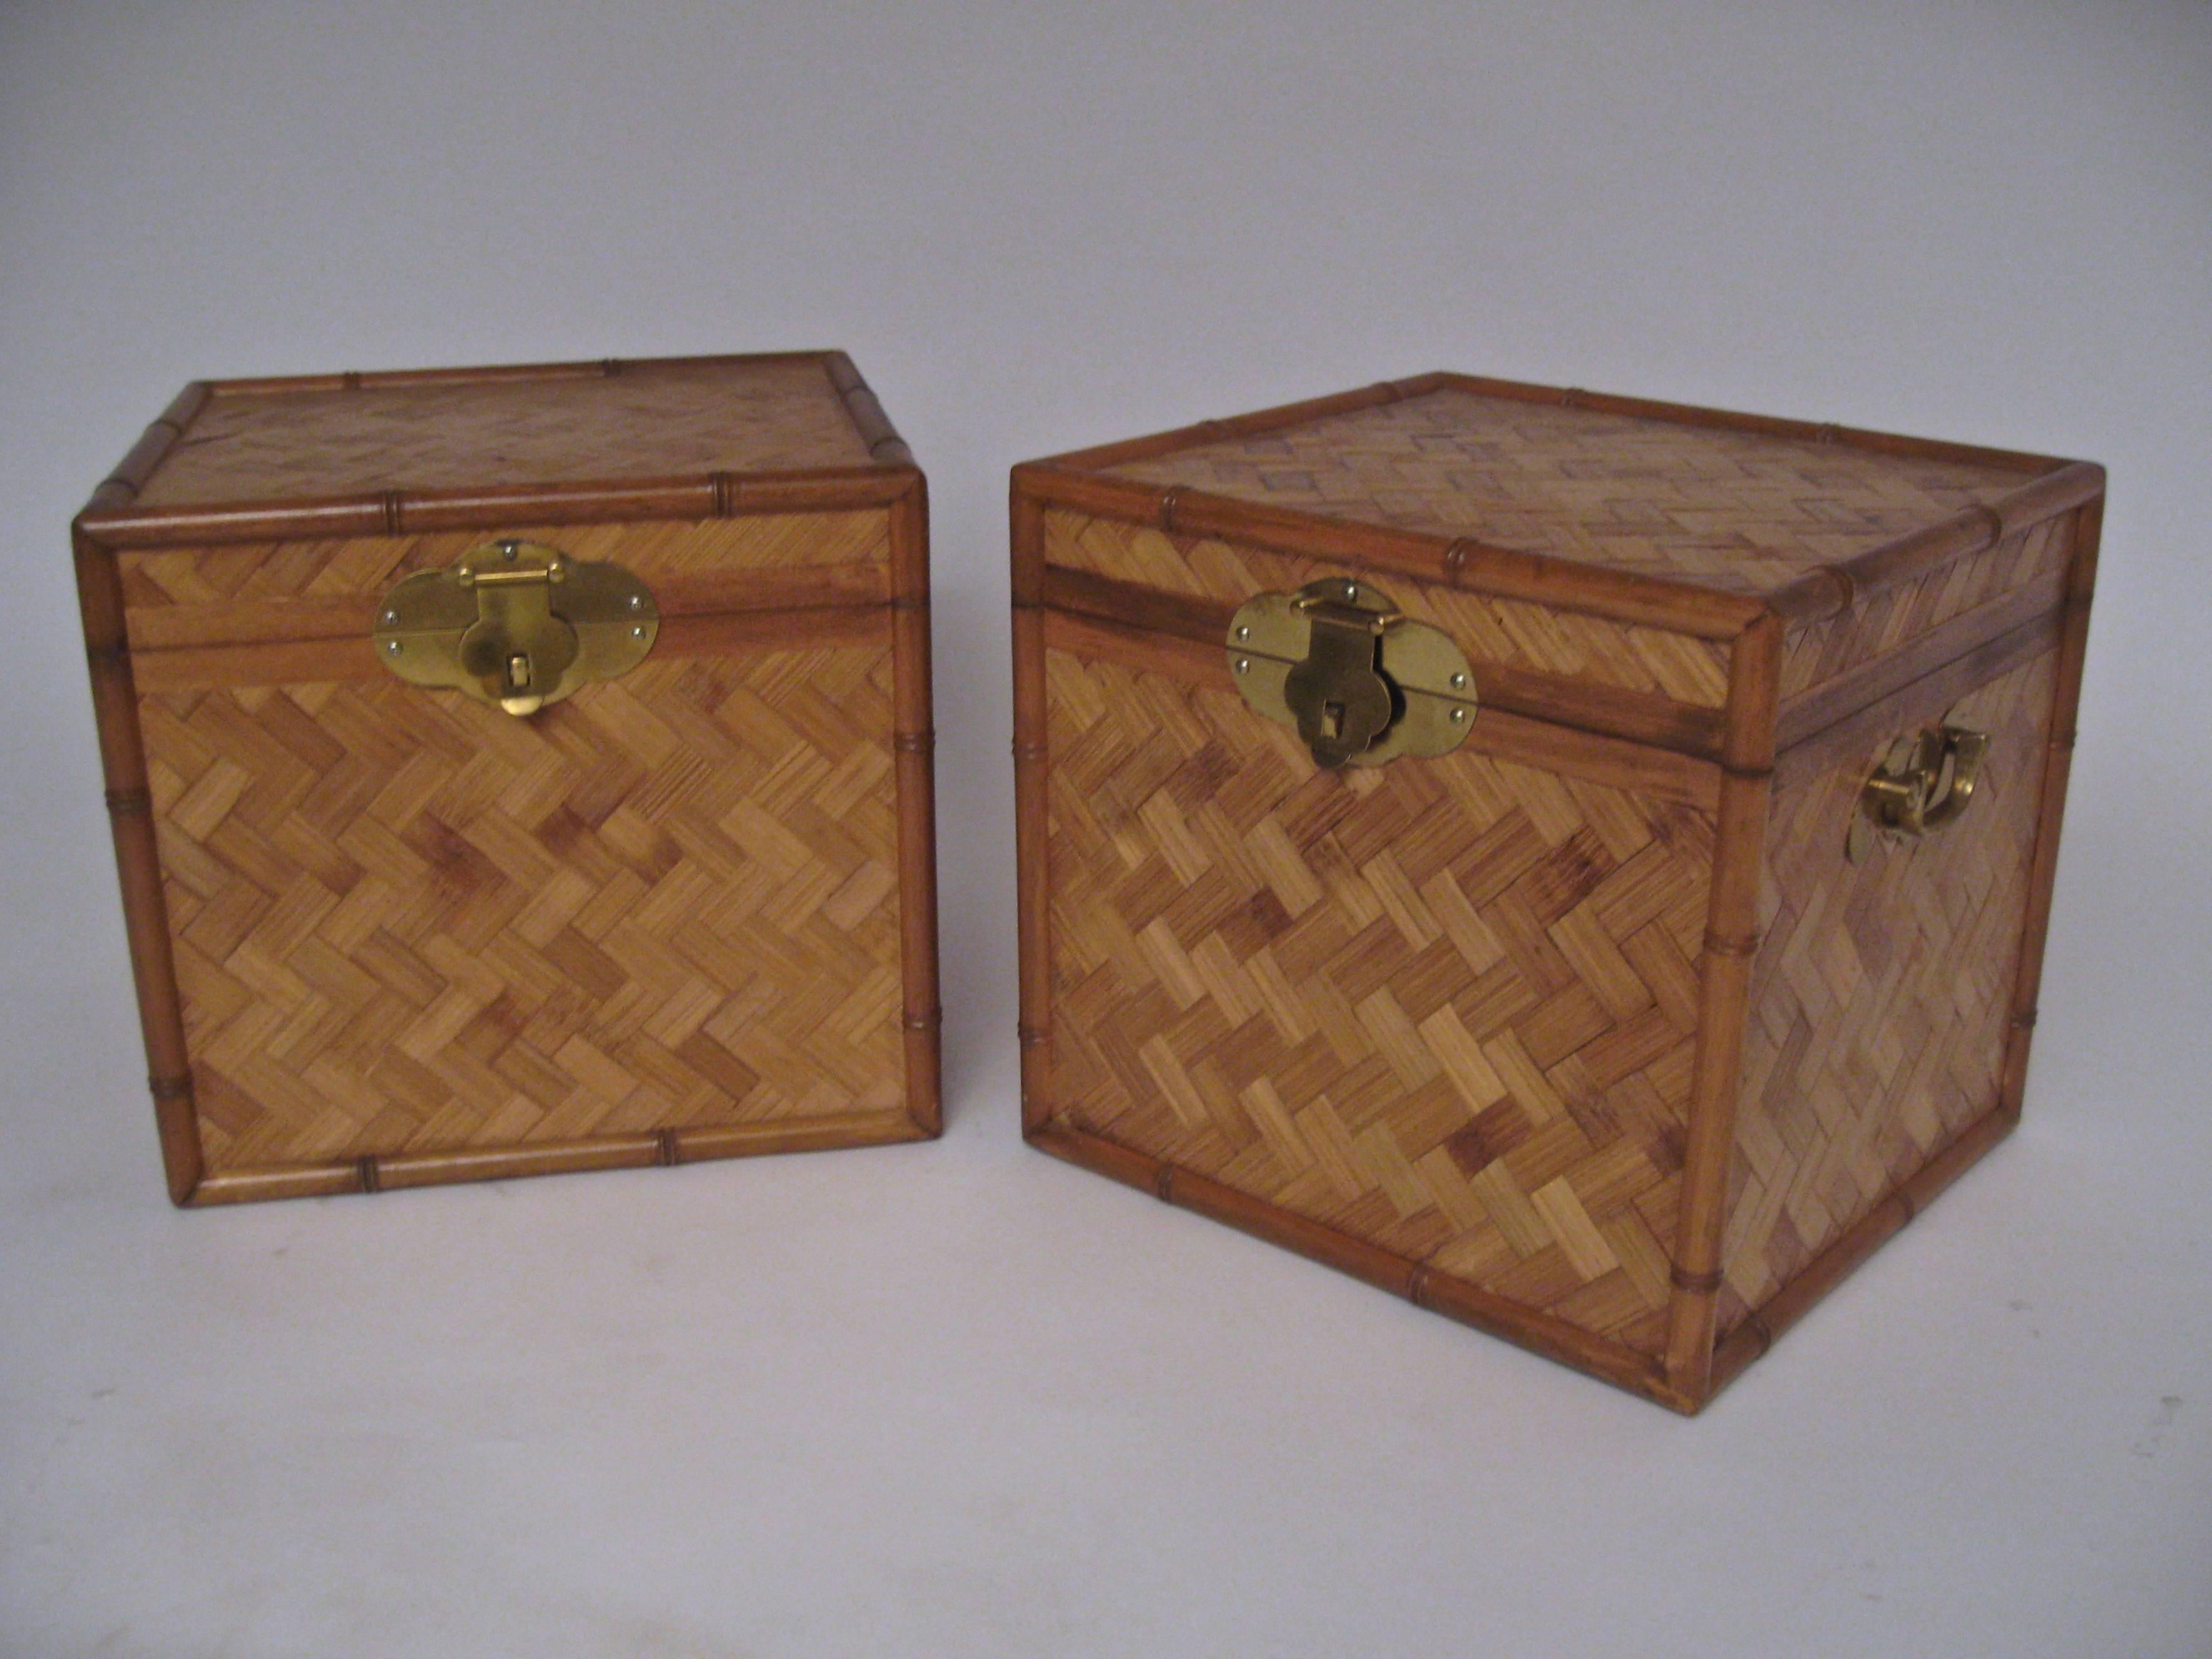 Wonderful pair of split bamboo and brass storage cube end tables. Solid brass hardware and hasp lock. Locks not included. Woven bamboo exterior with half round solid bamboo edge accents. Deep compartment storage. 